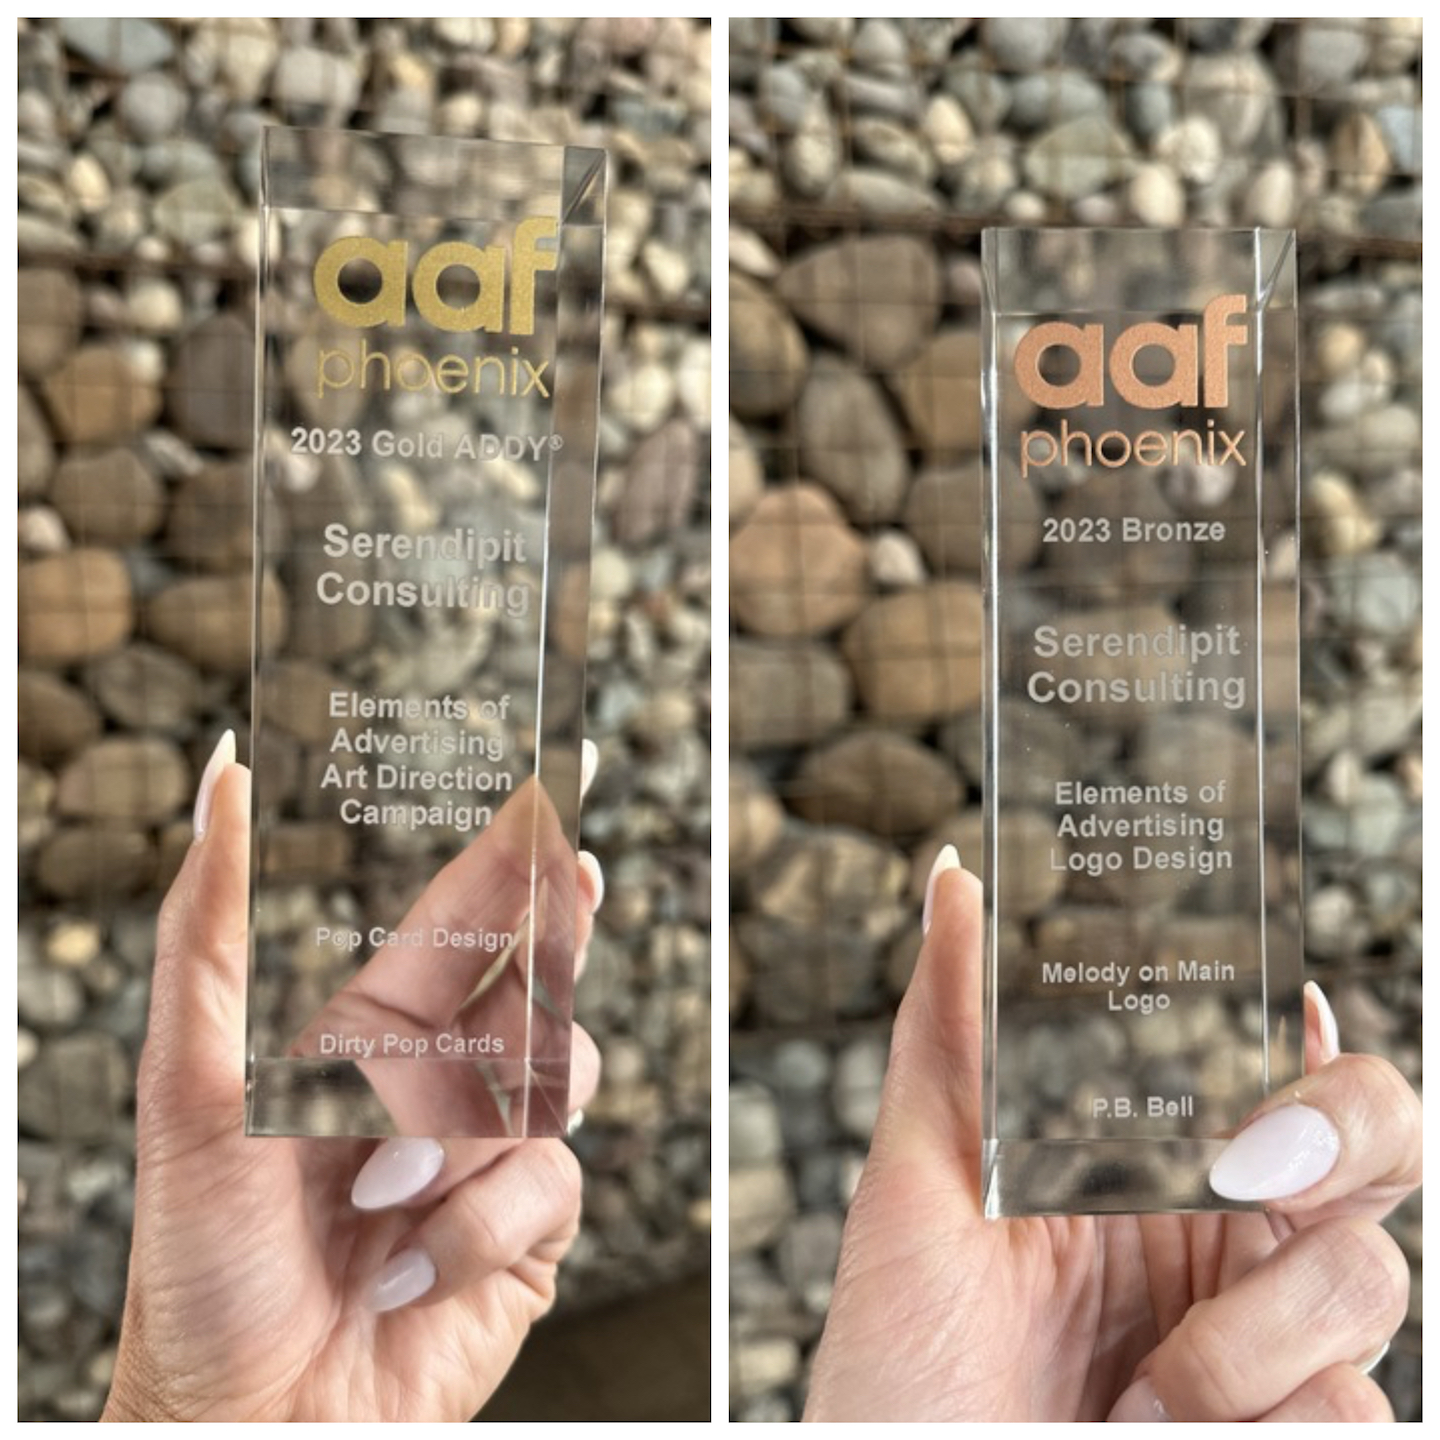 Serendipit Consulting Wins Two ADDY Awards